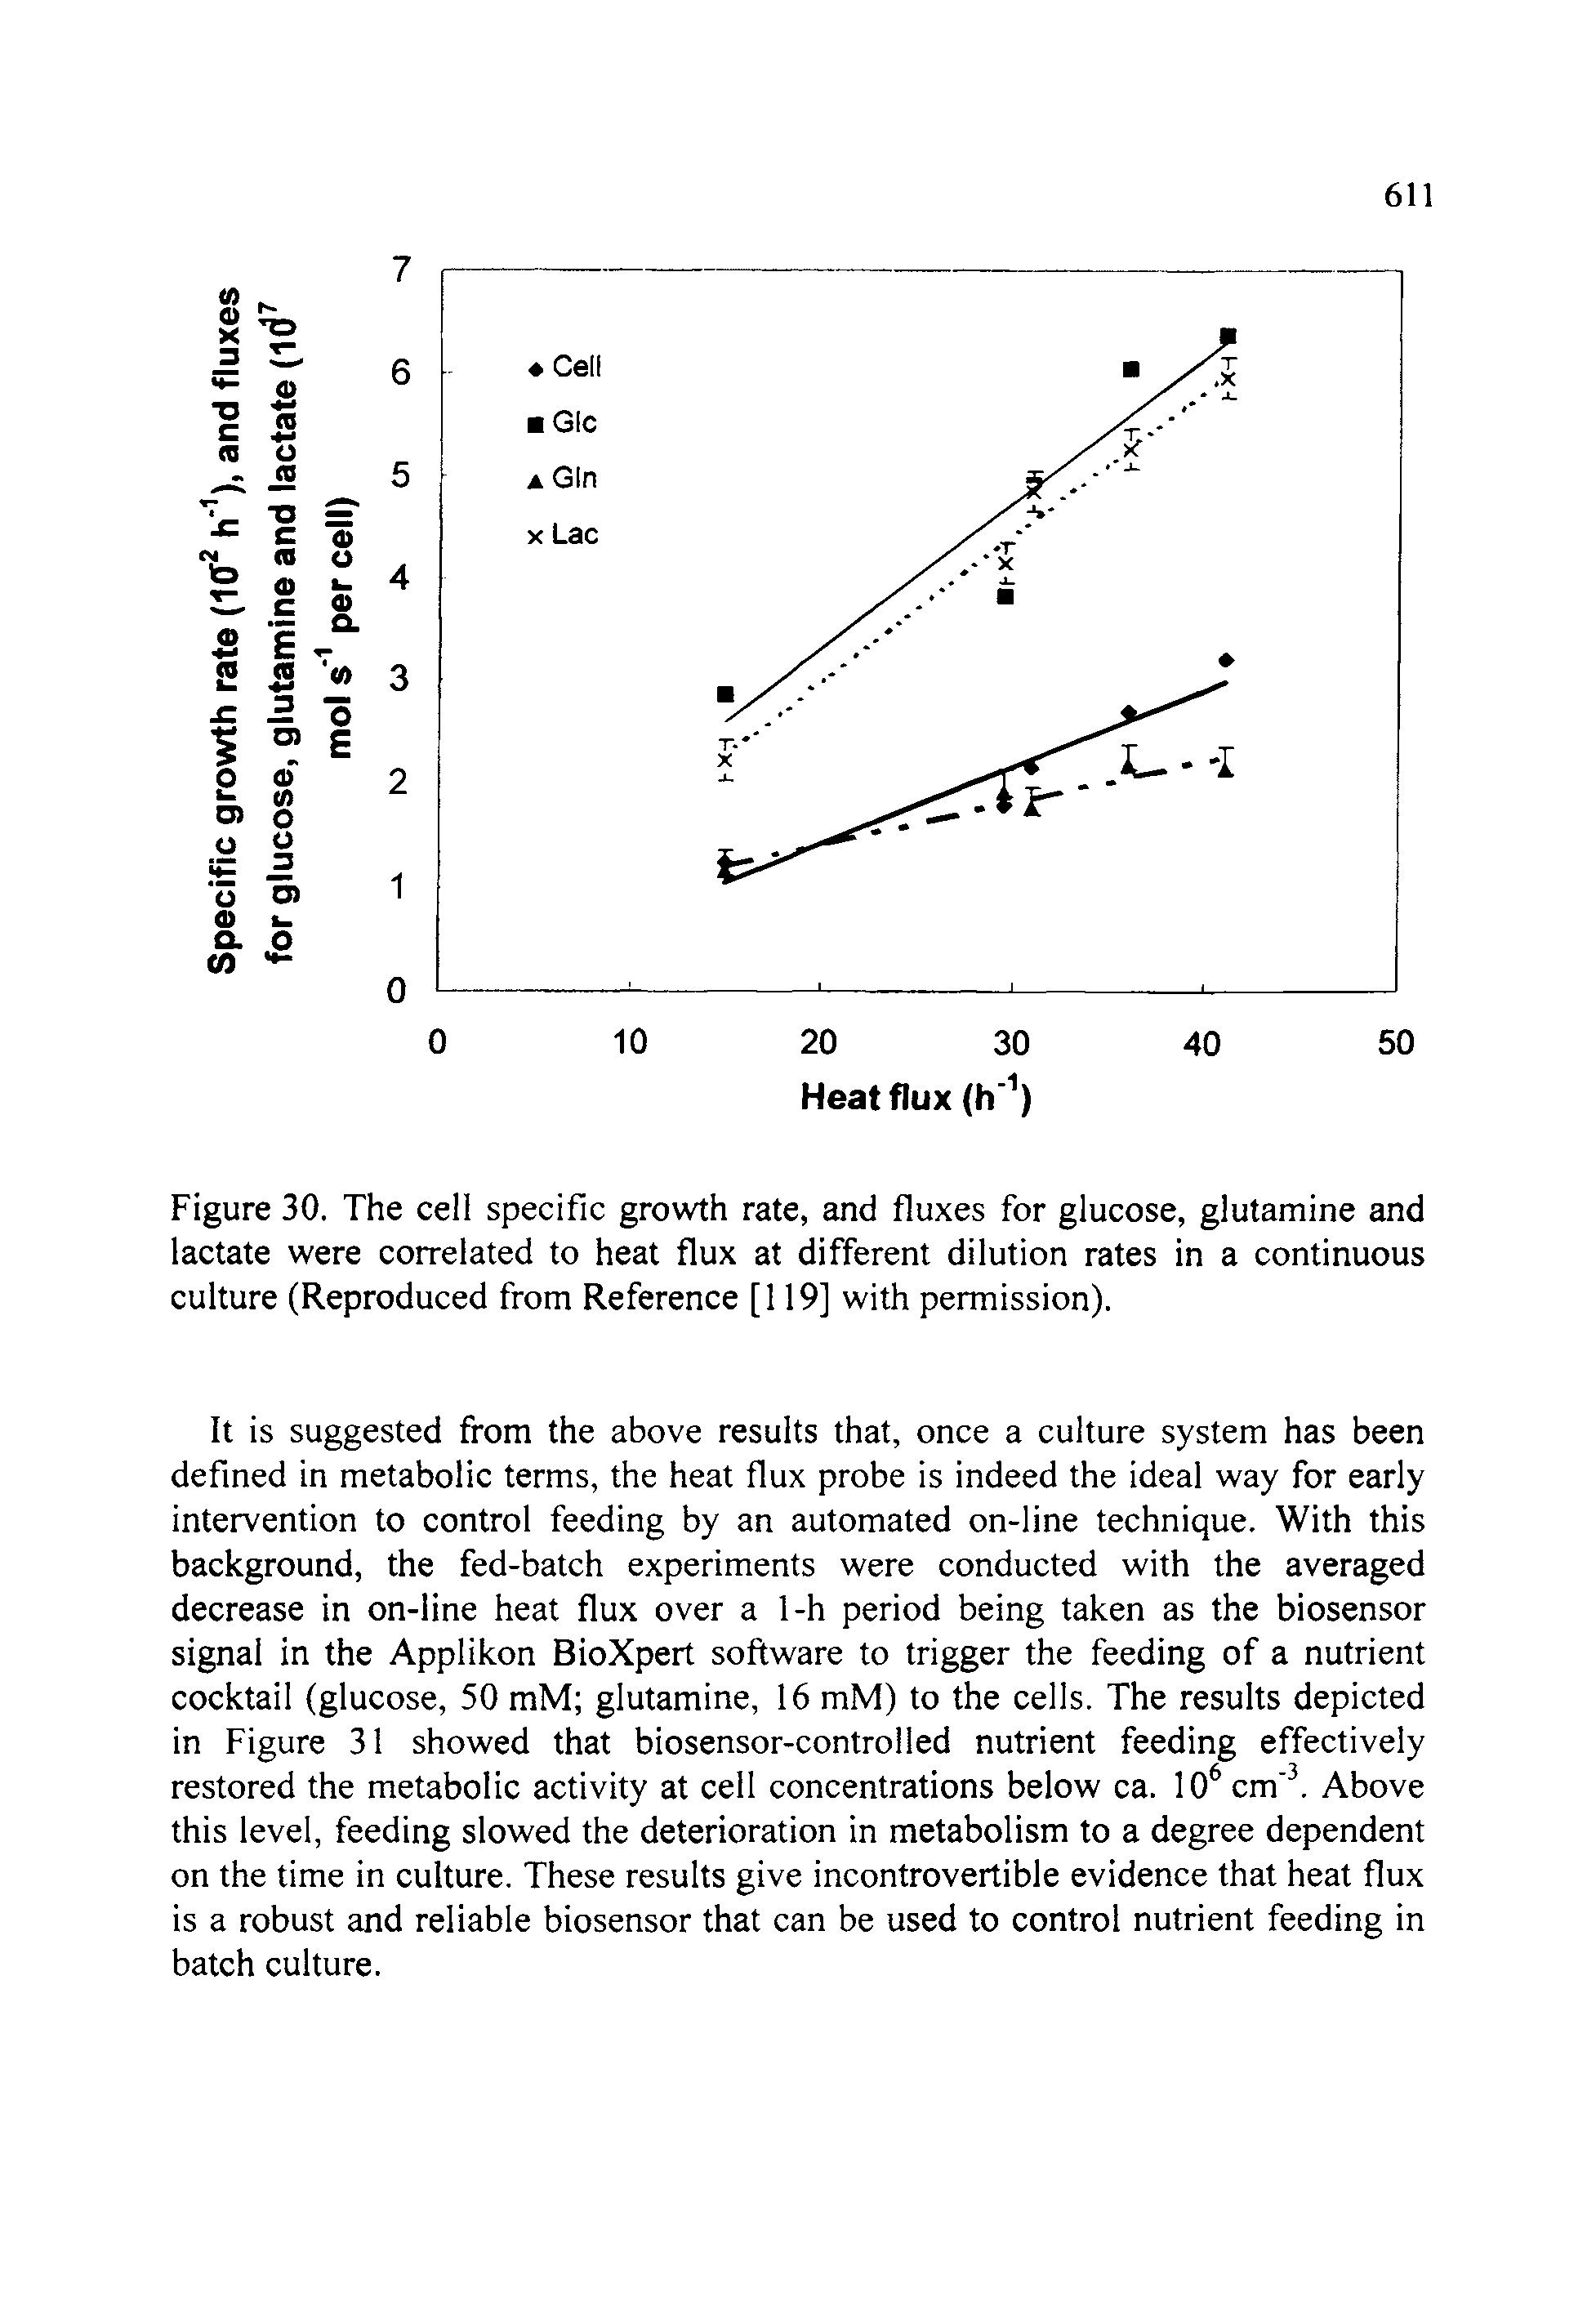 Figure 30. The cell specific growth rate, and fluxes for glucose, glutamine and lactate were correlated to heat flux at different dilution rates in a continuous culture (Reproduced from Reference [119] with permission).